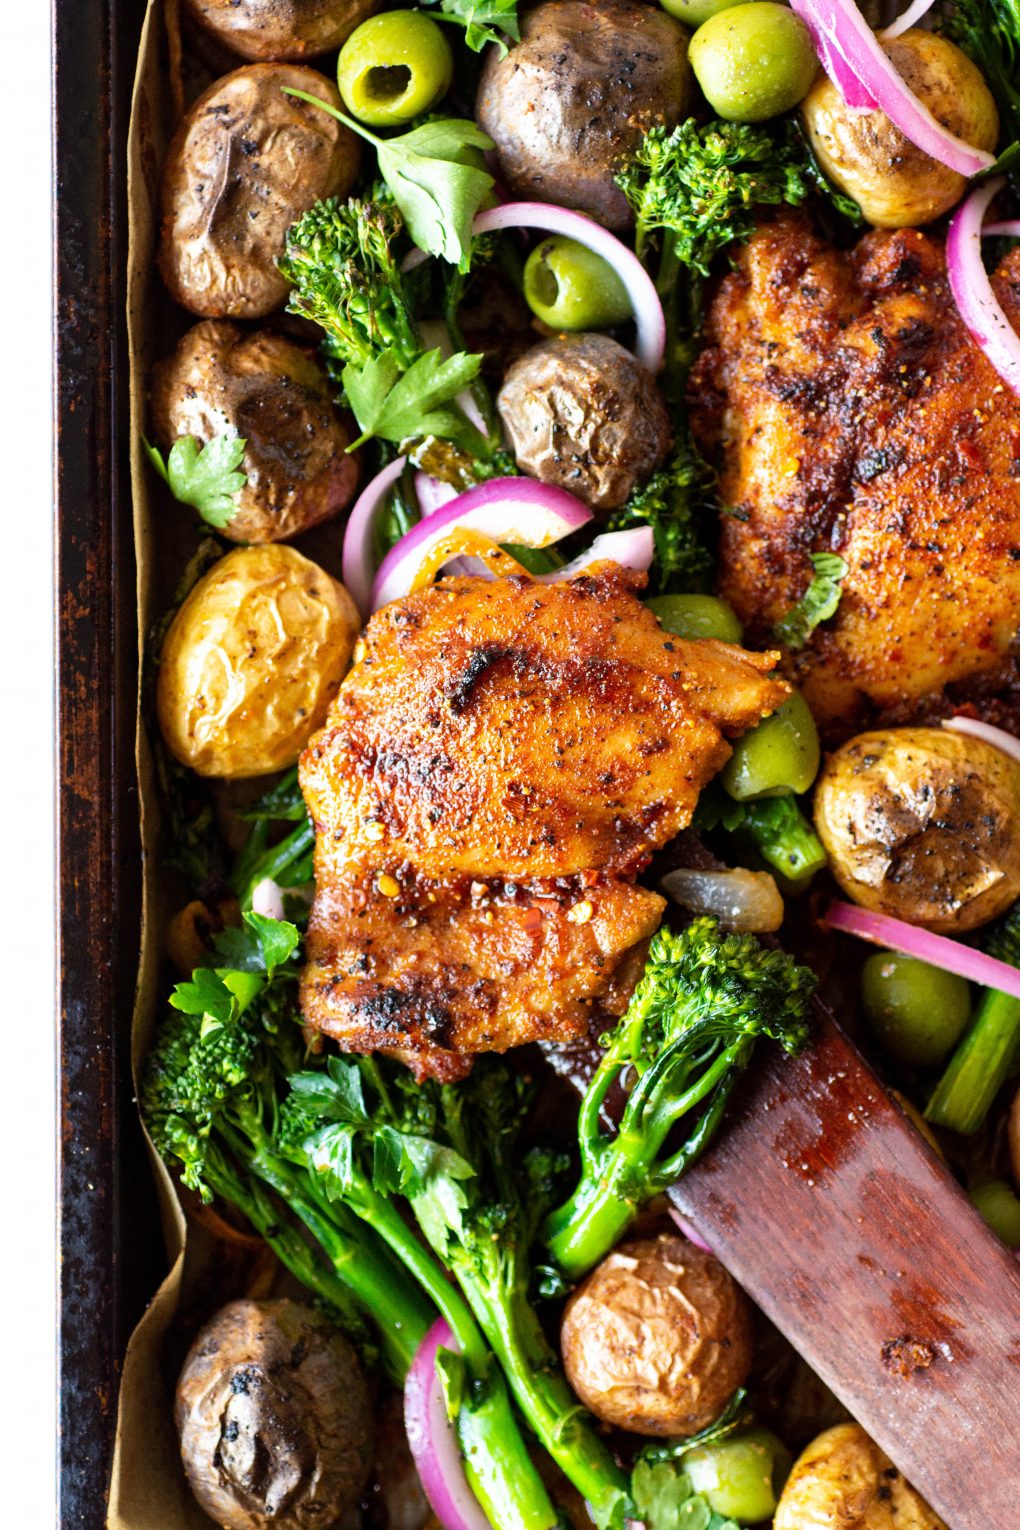 Overhead view of of a roasting tray with spiced chicken thighs, potatos, broccolini, olives, and pickled red onions